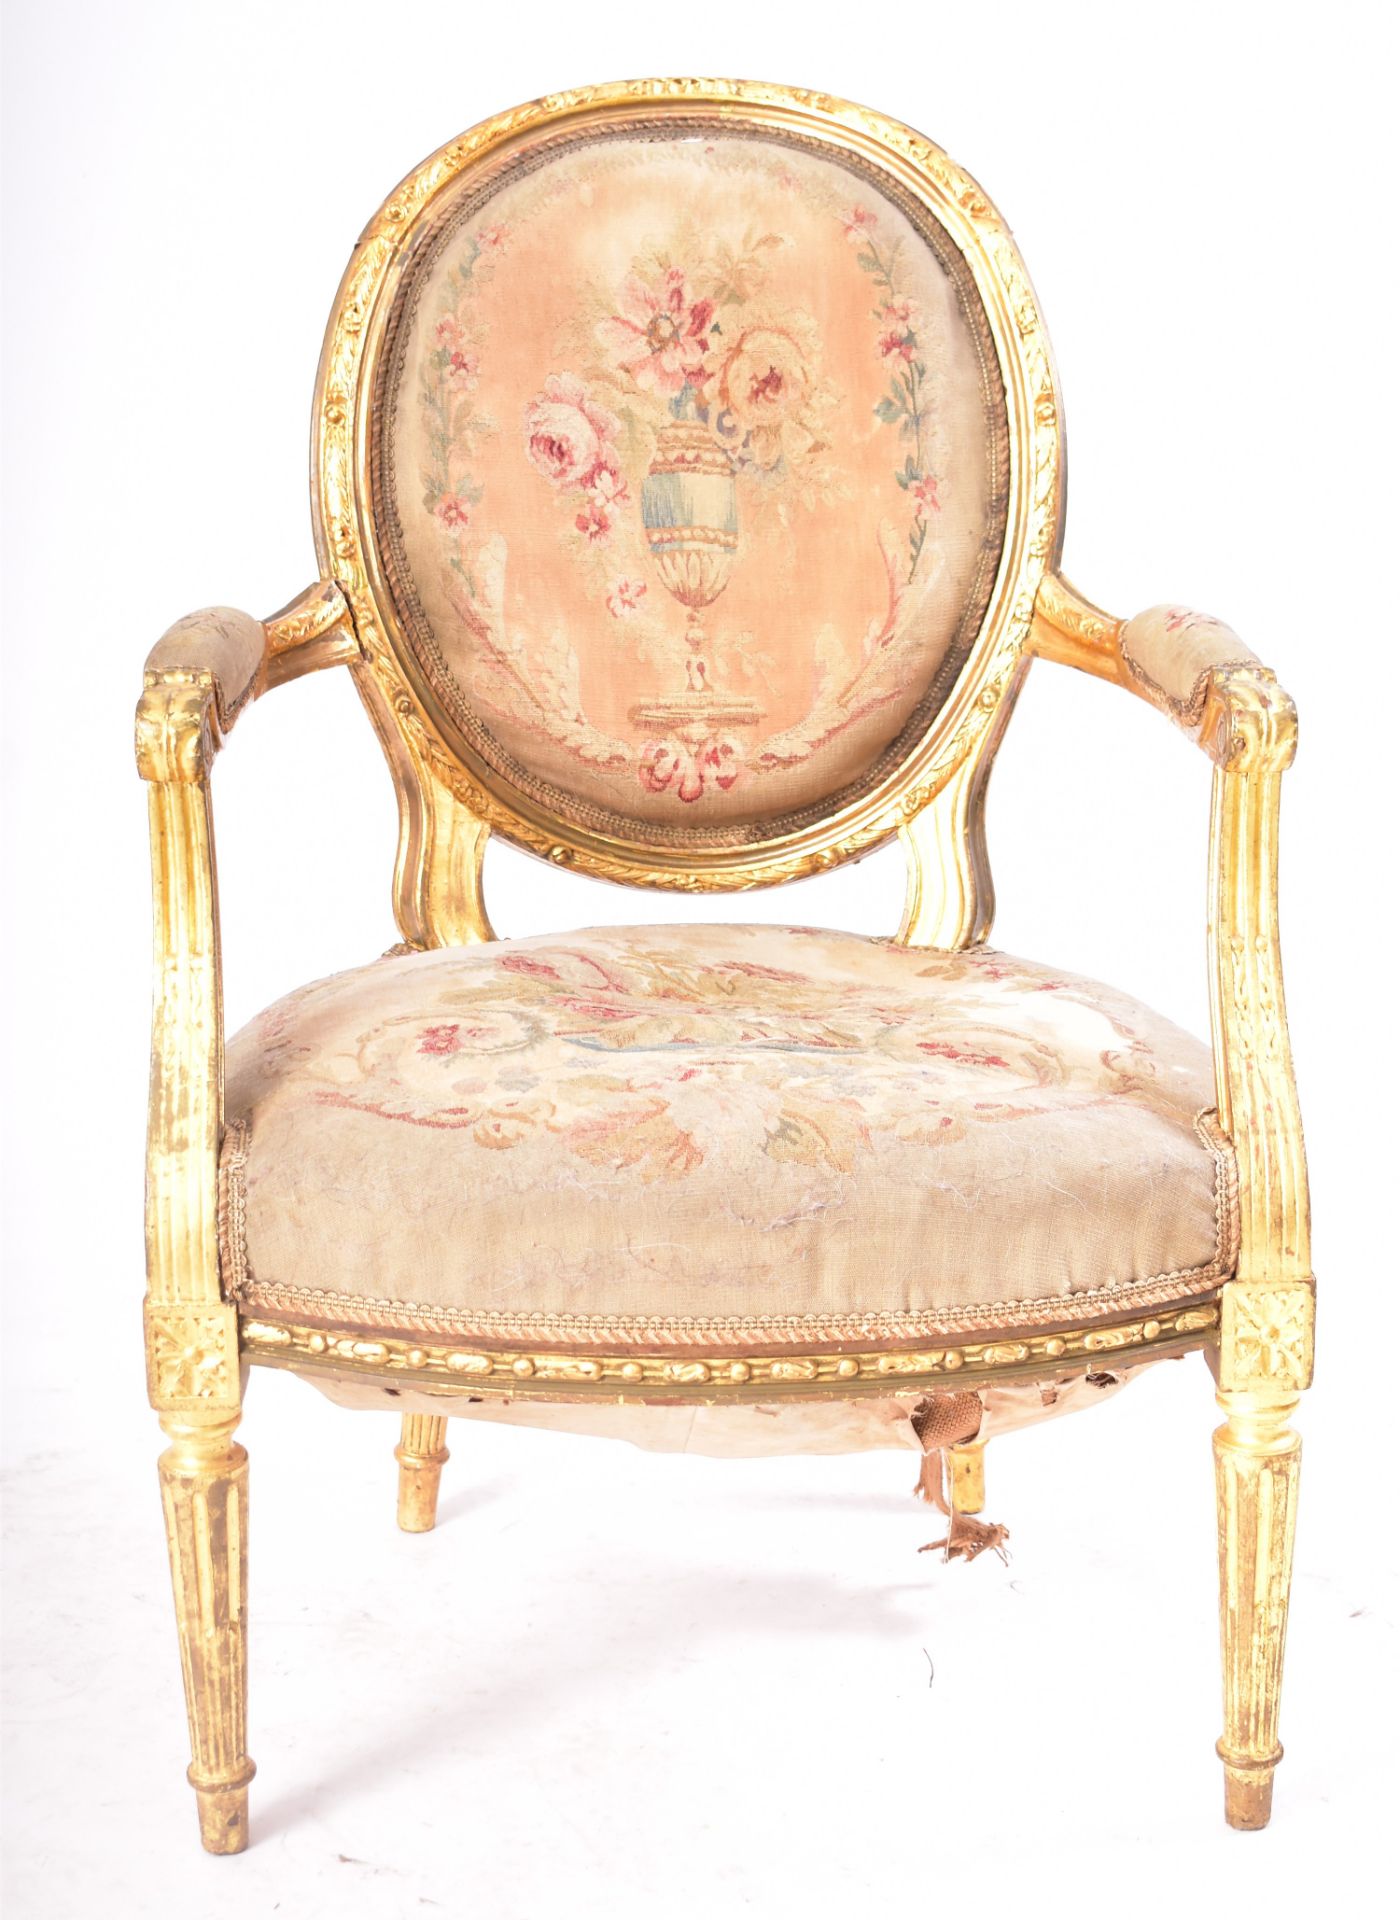 19TH CENTURY FRENCH GILTWOOD ELBOW CHAIR - Image 2 of 6